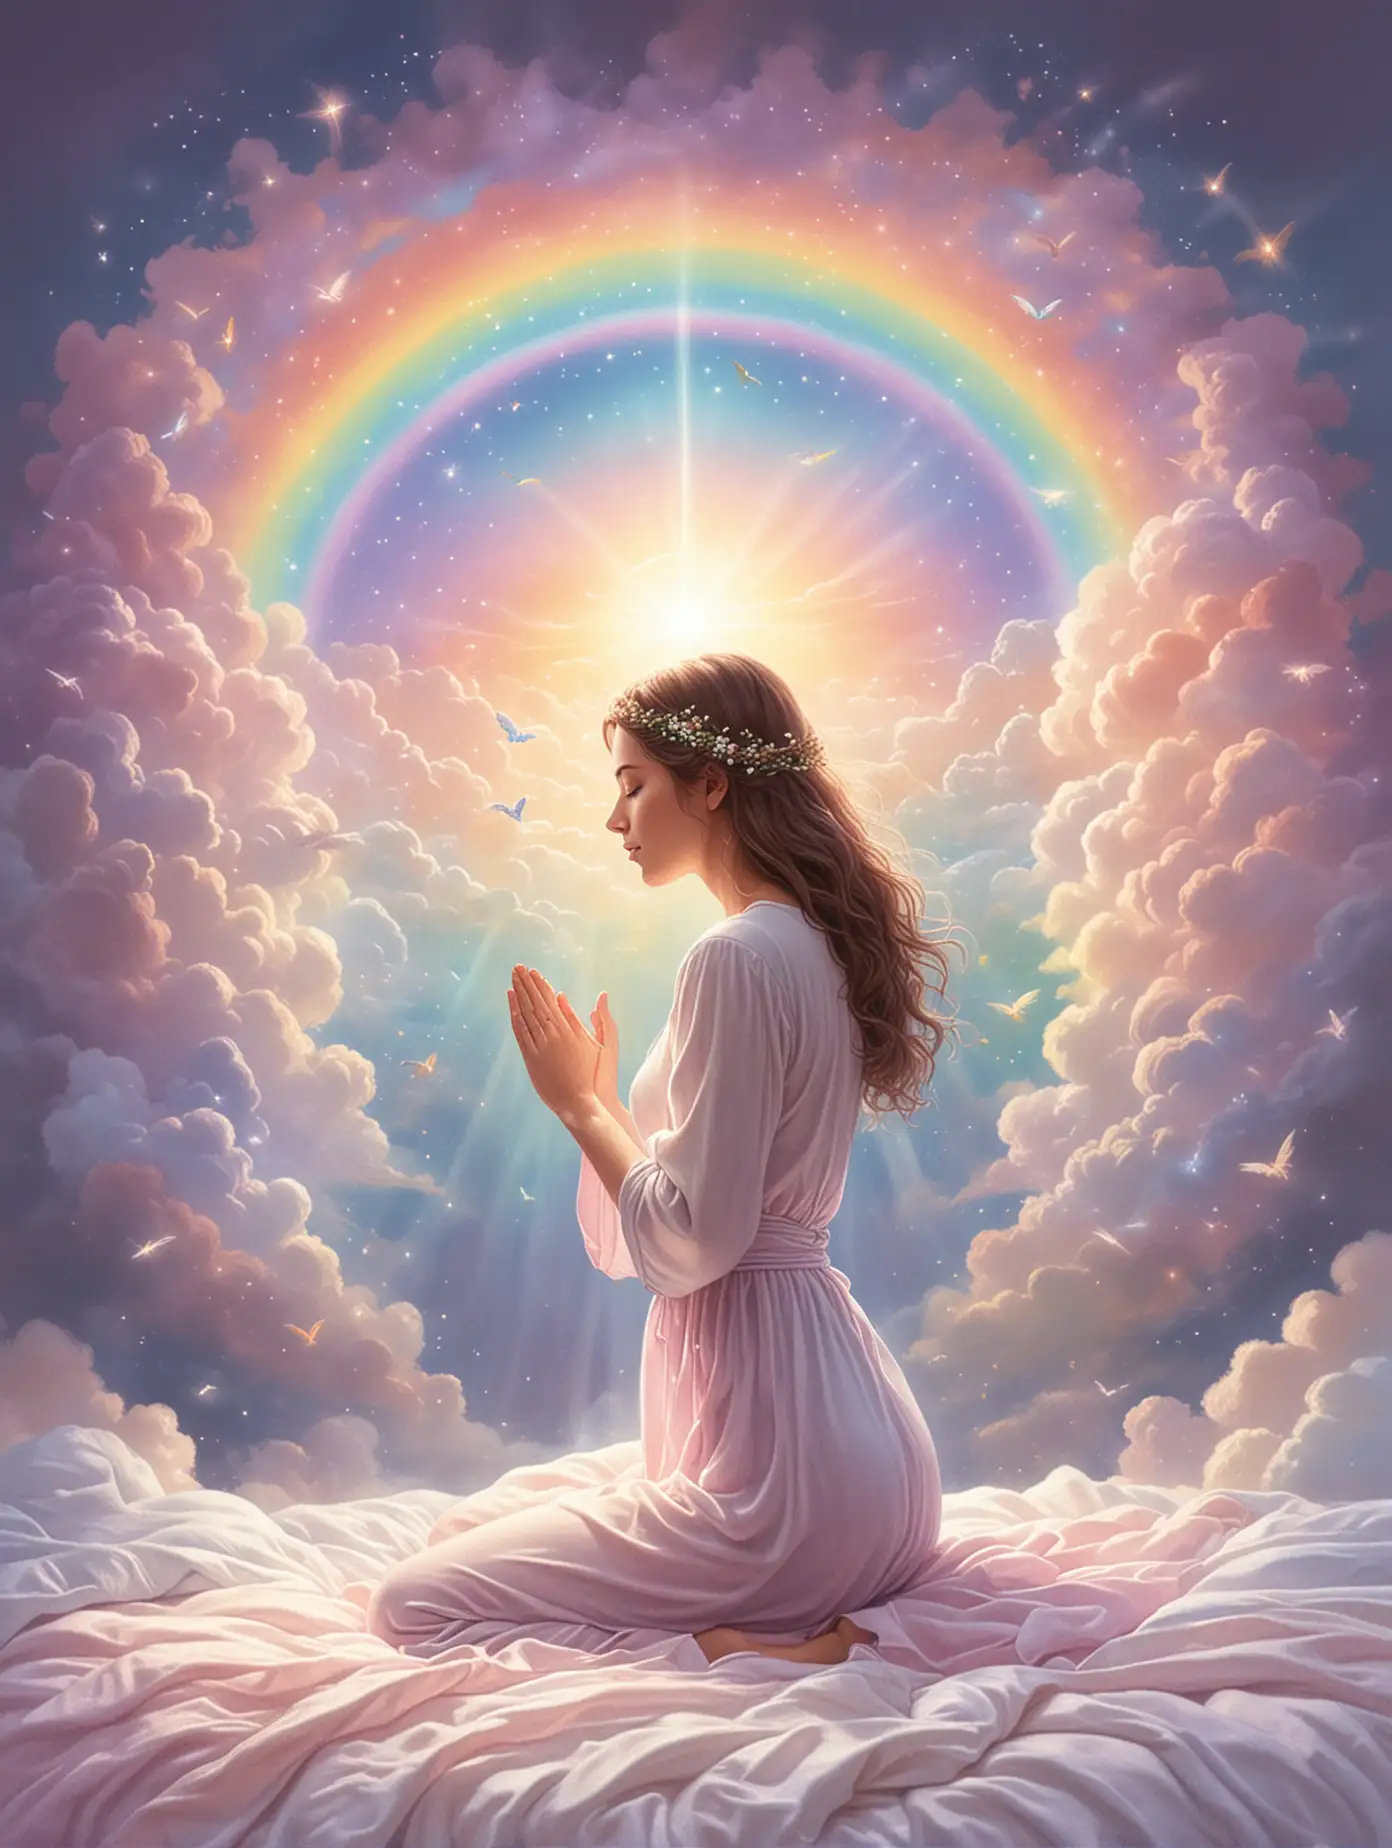 please create a pastel rainbow artwork that depicts a person about to go to sleep praying: Dear Divinity,

Goodness above,
Thanks for your guidance, protection, and love.

Thank you for helping my body rest,
while each cell improves to its best.

Thank you for helping my mind clear,
As my subconscious resolves, ascends, and reveals.

Thank you for helping me grow through my dreams
And for the support of my spirit teams.

Thank you for waking me with a reignited light,
 New strength and wisdom to live with love and might.